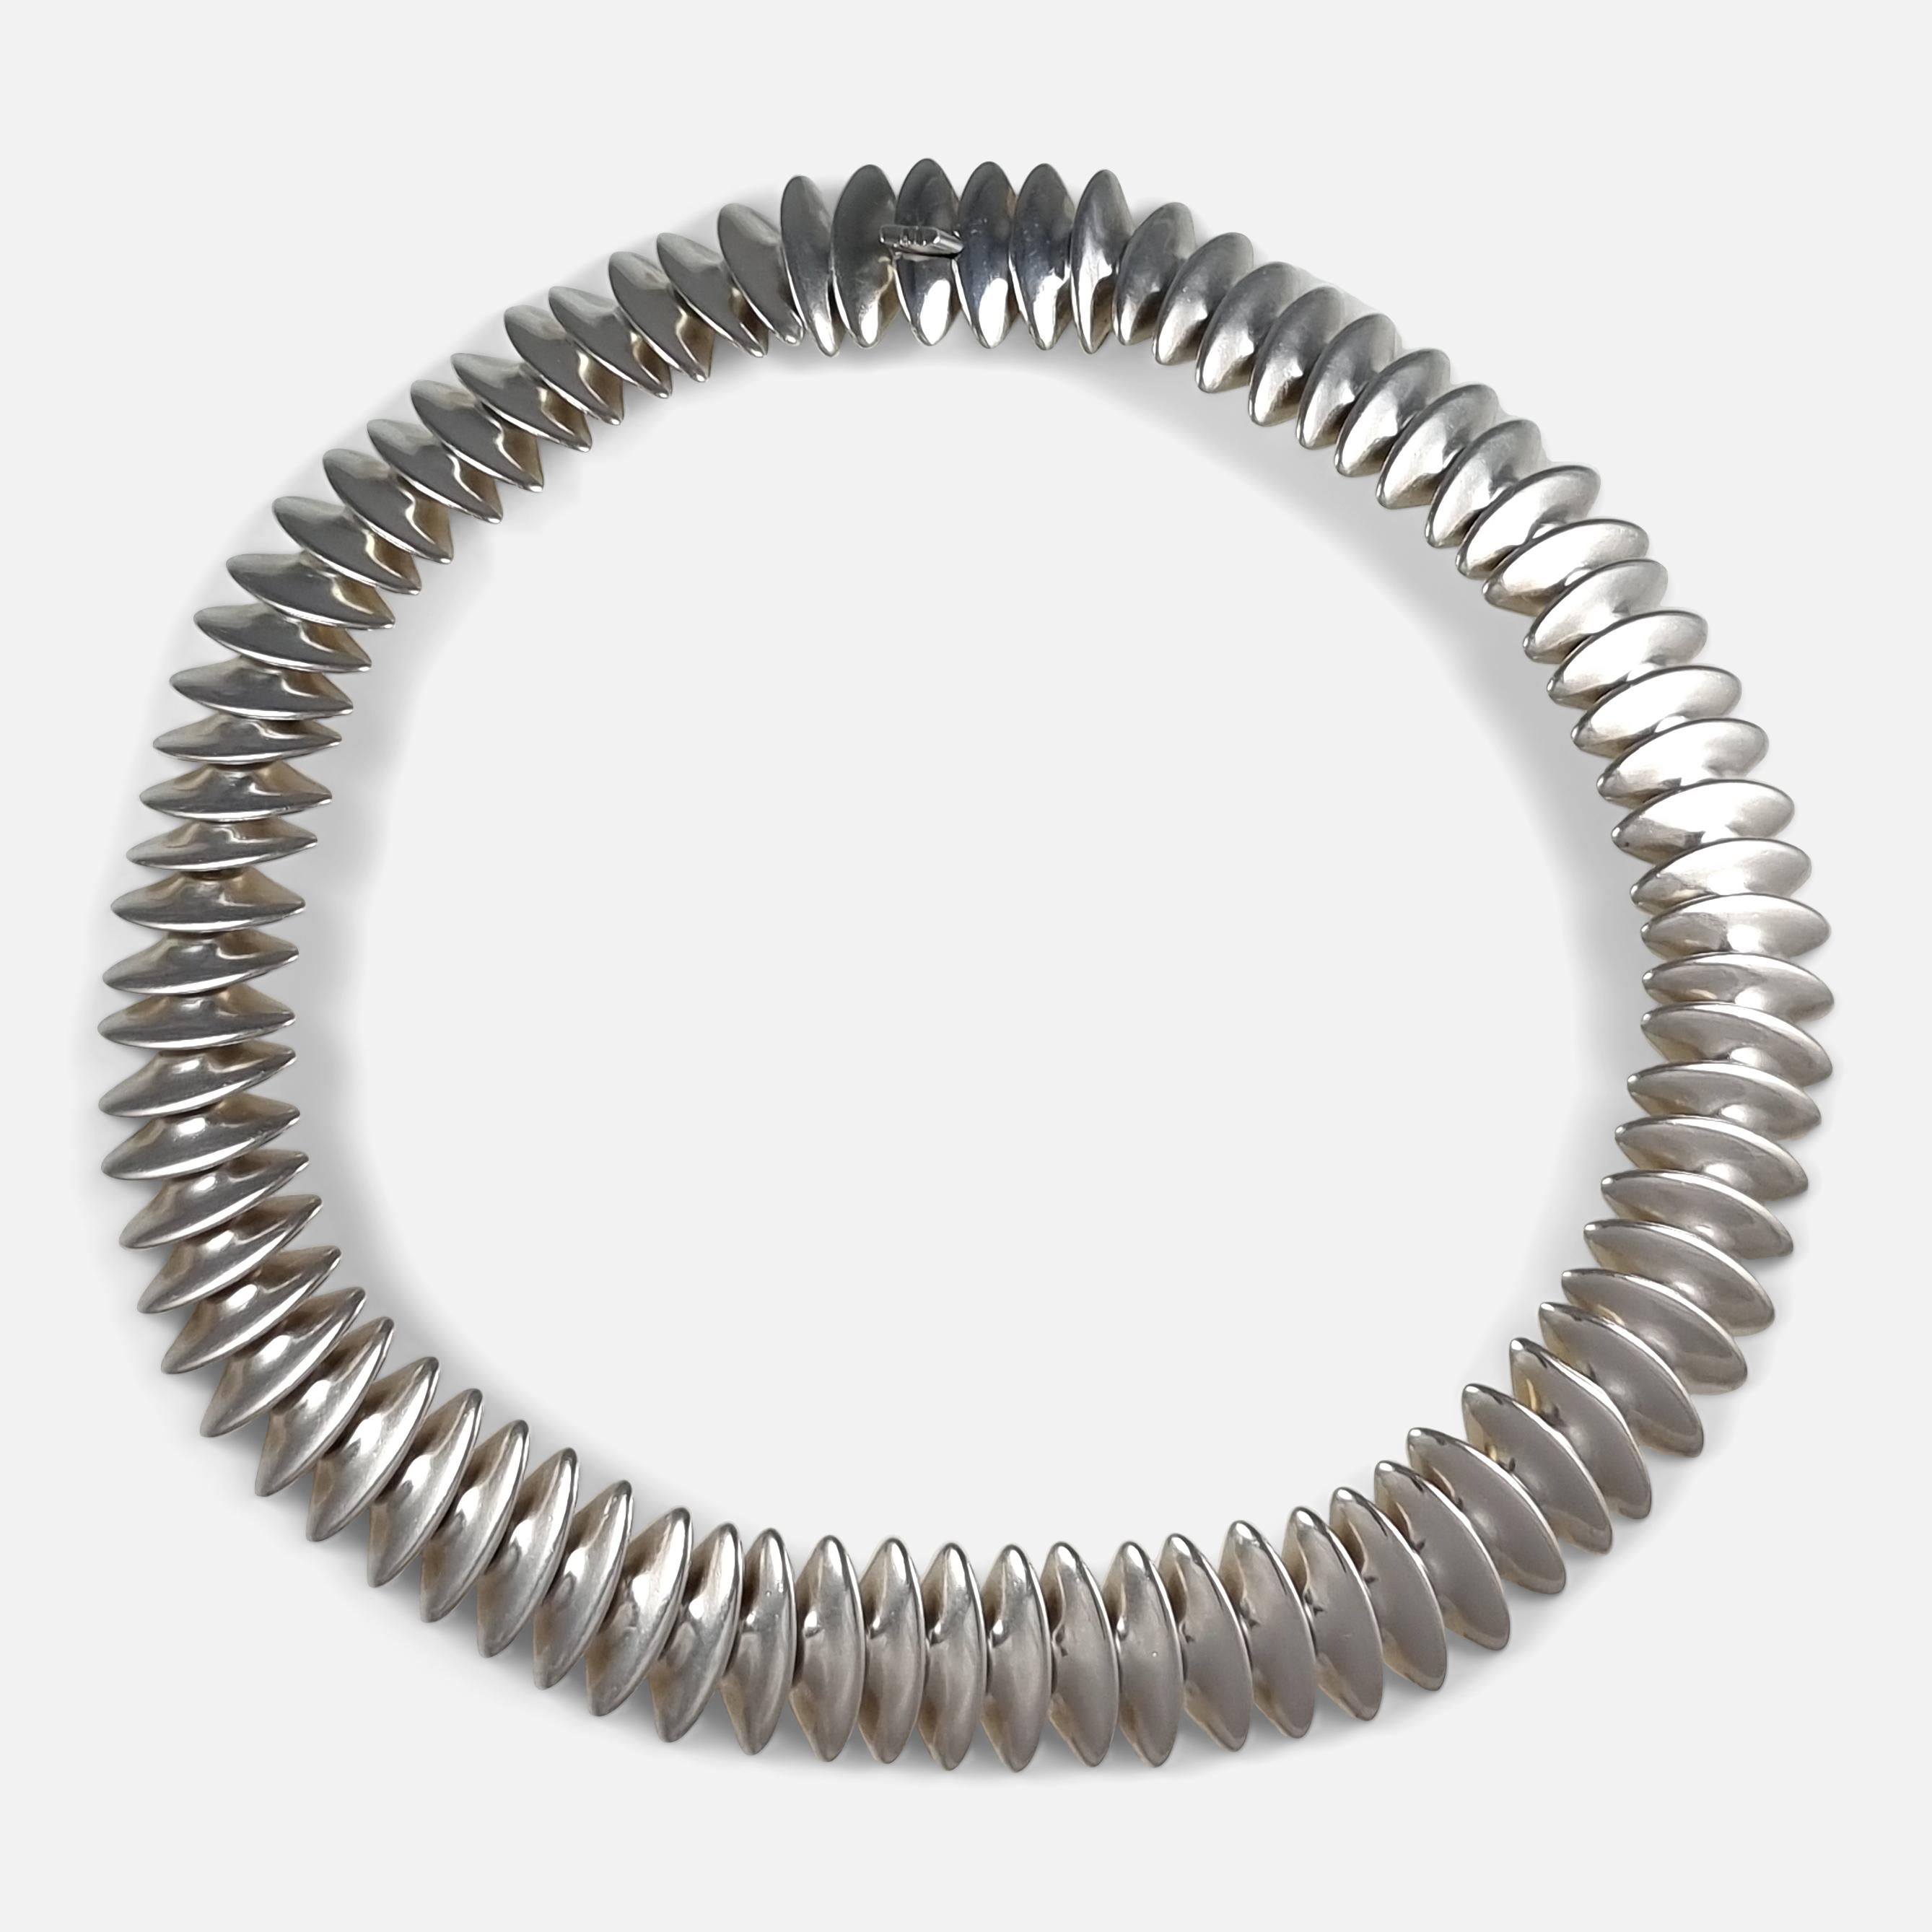 A sterling silver necklace, by Hans Hansen for Georg Jensen.

The necklace was originally designed by Bent Gabrielsen for Hans Hansen, before the firm of Hans Hansen was taken over by Georg Jensen.

The necklace is stamped with the Georg Jensen